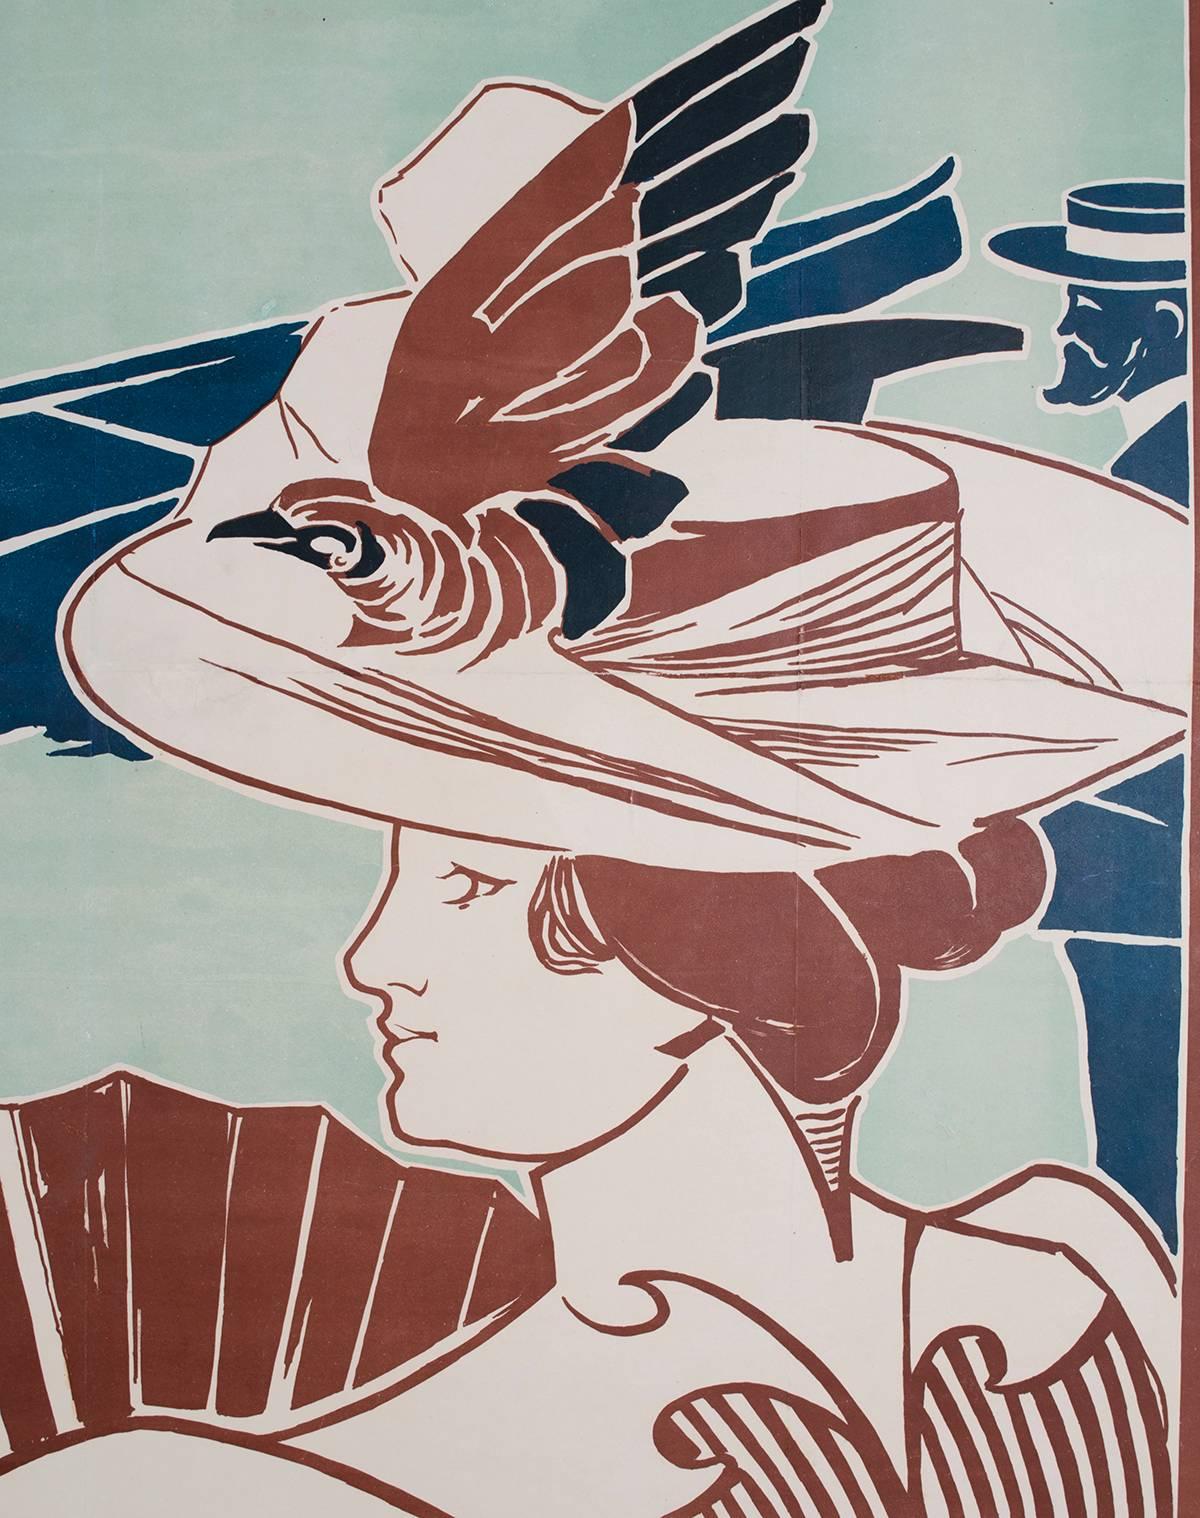 "Regate et Chapeau a Plumes," a Belgian turn of the century poster by Auguste Donnay, 1895. This piece references a regatta on the River Meuse. Donnay (1862-1921) was a Belgian born painter, illustrator and poster artist. He attended and